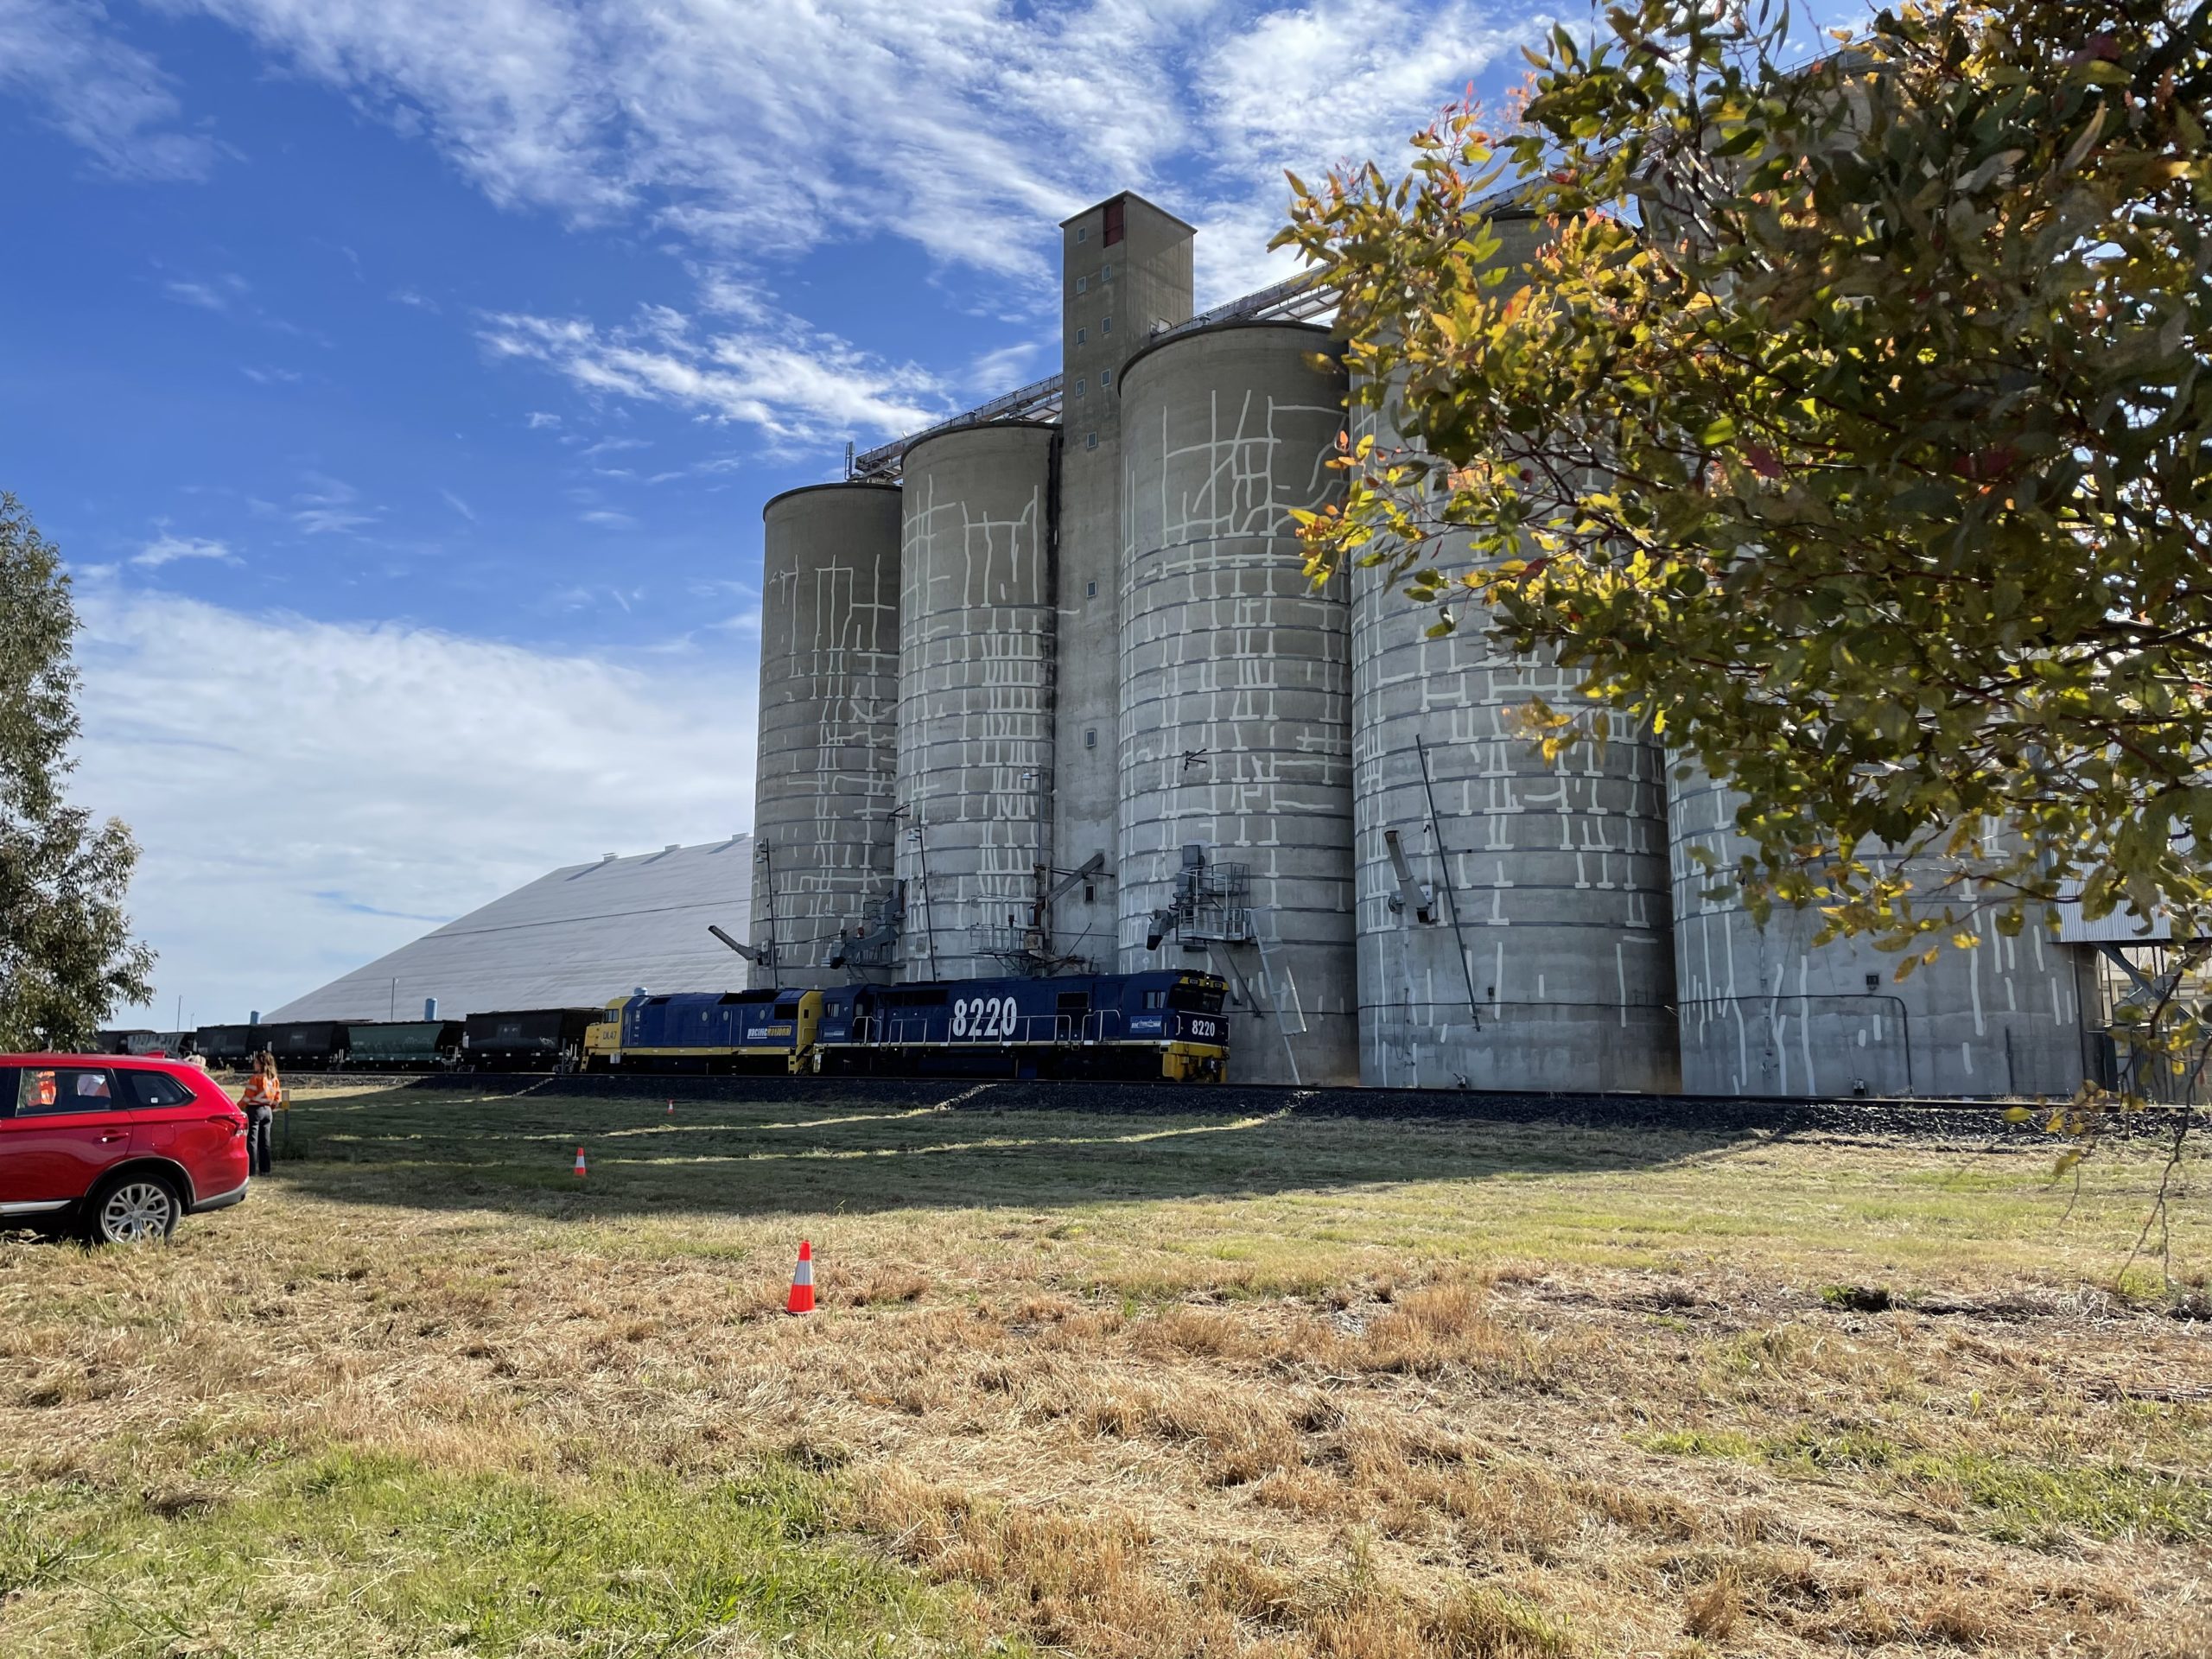 train next to grain silos on new section of track between Narrabri to North Star